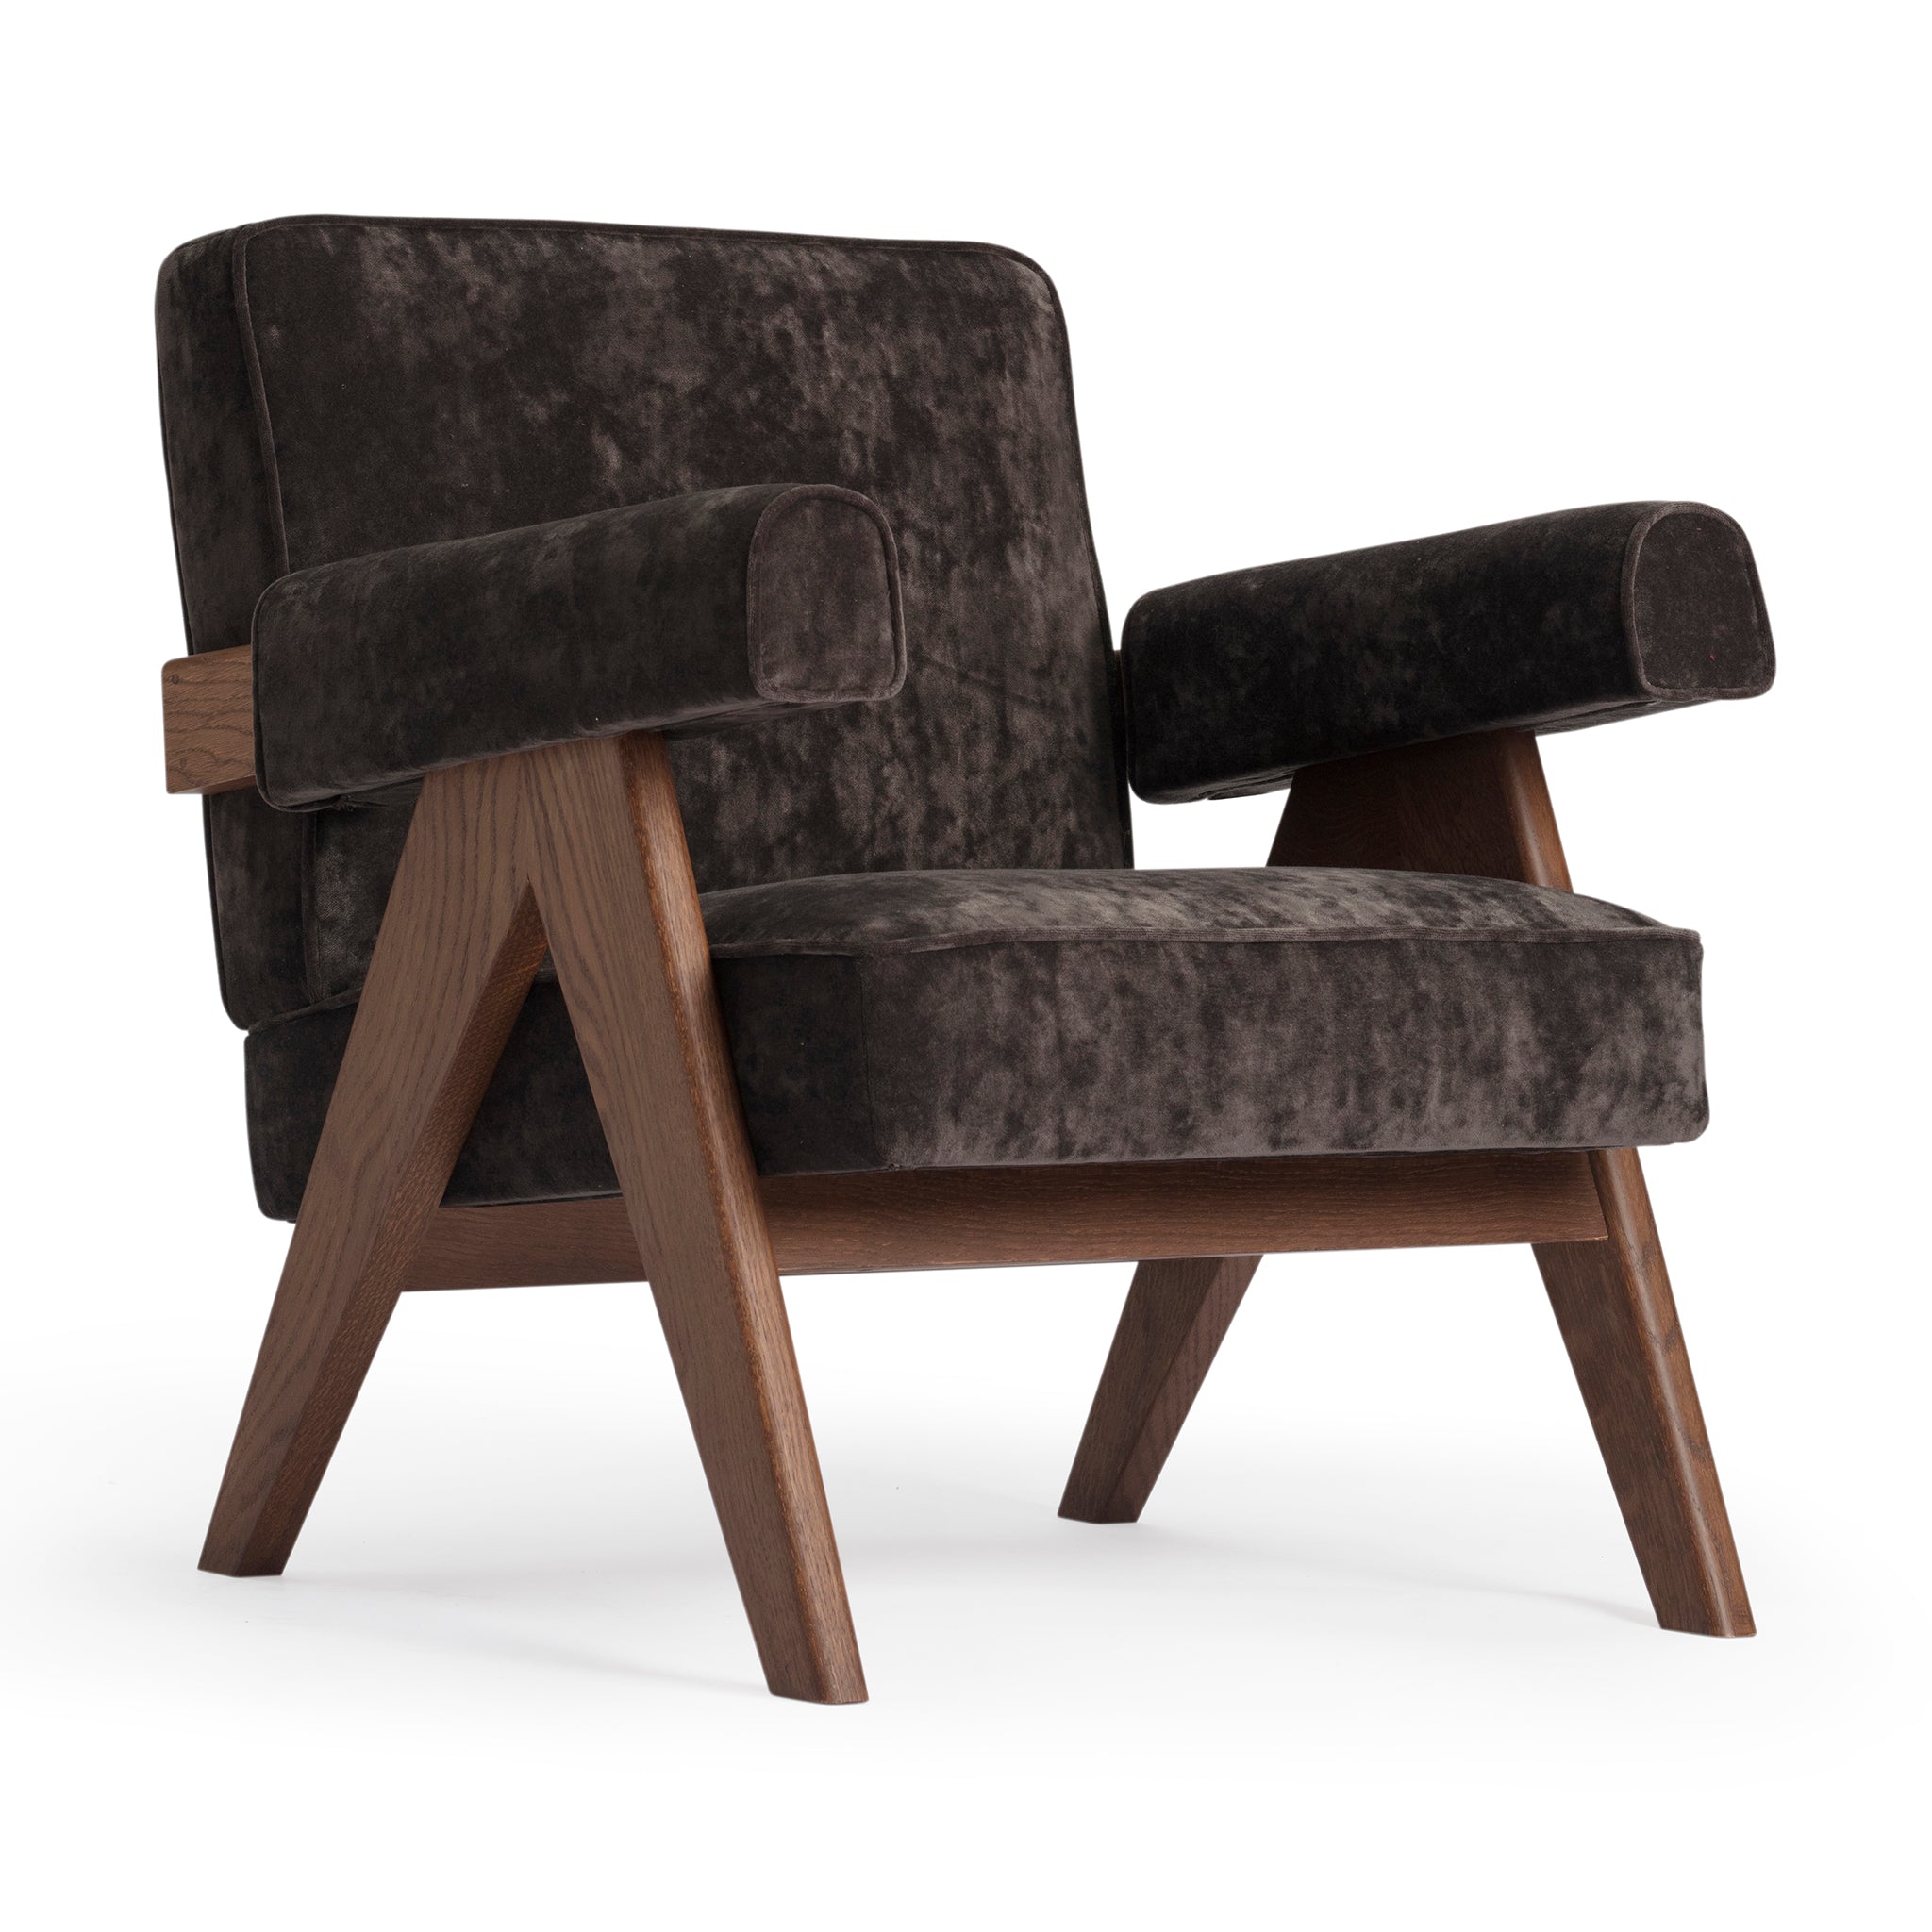 Main view of an authentic chandigarh lounge chair, pierre jeanneret era, walnut oak frame, chocolate brown mohair upholstery, by Klarel #K35-15